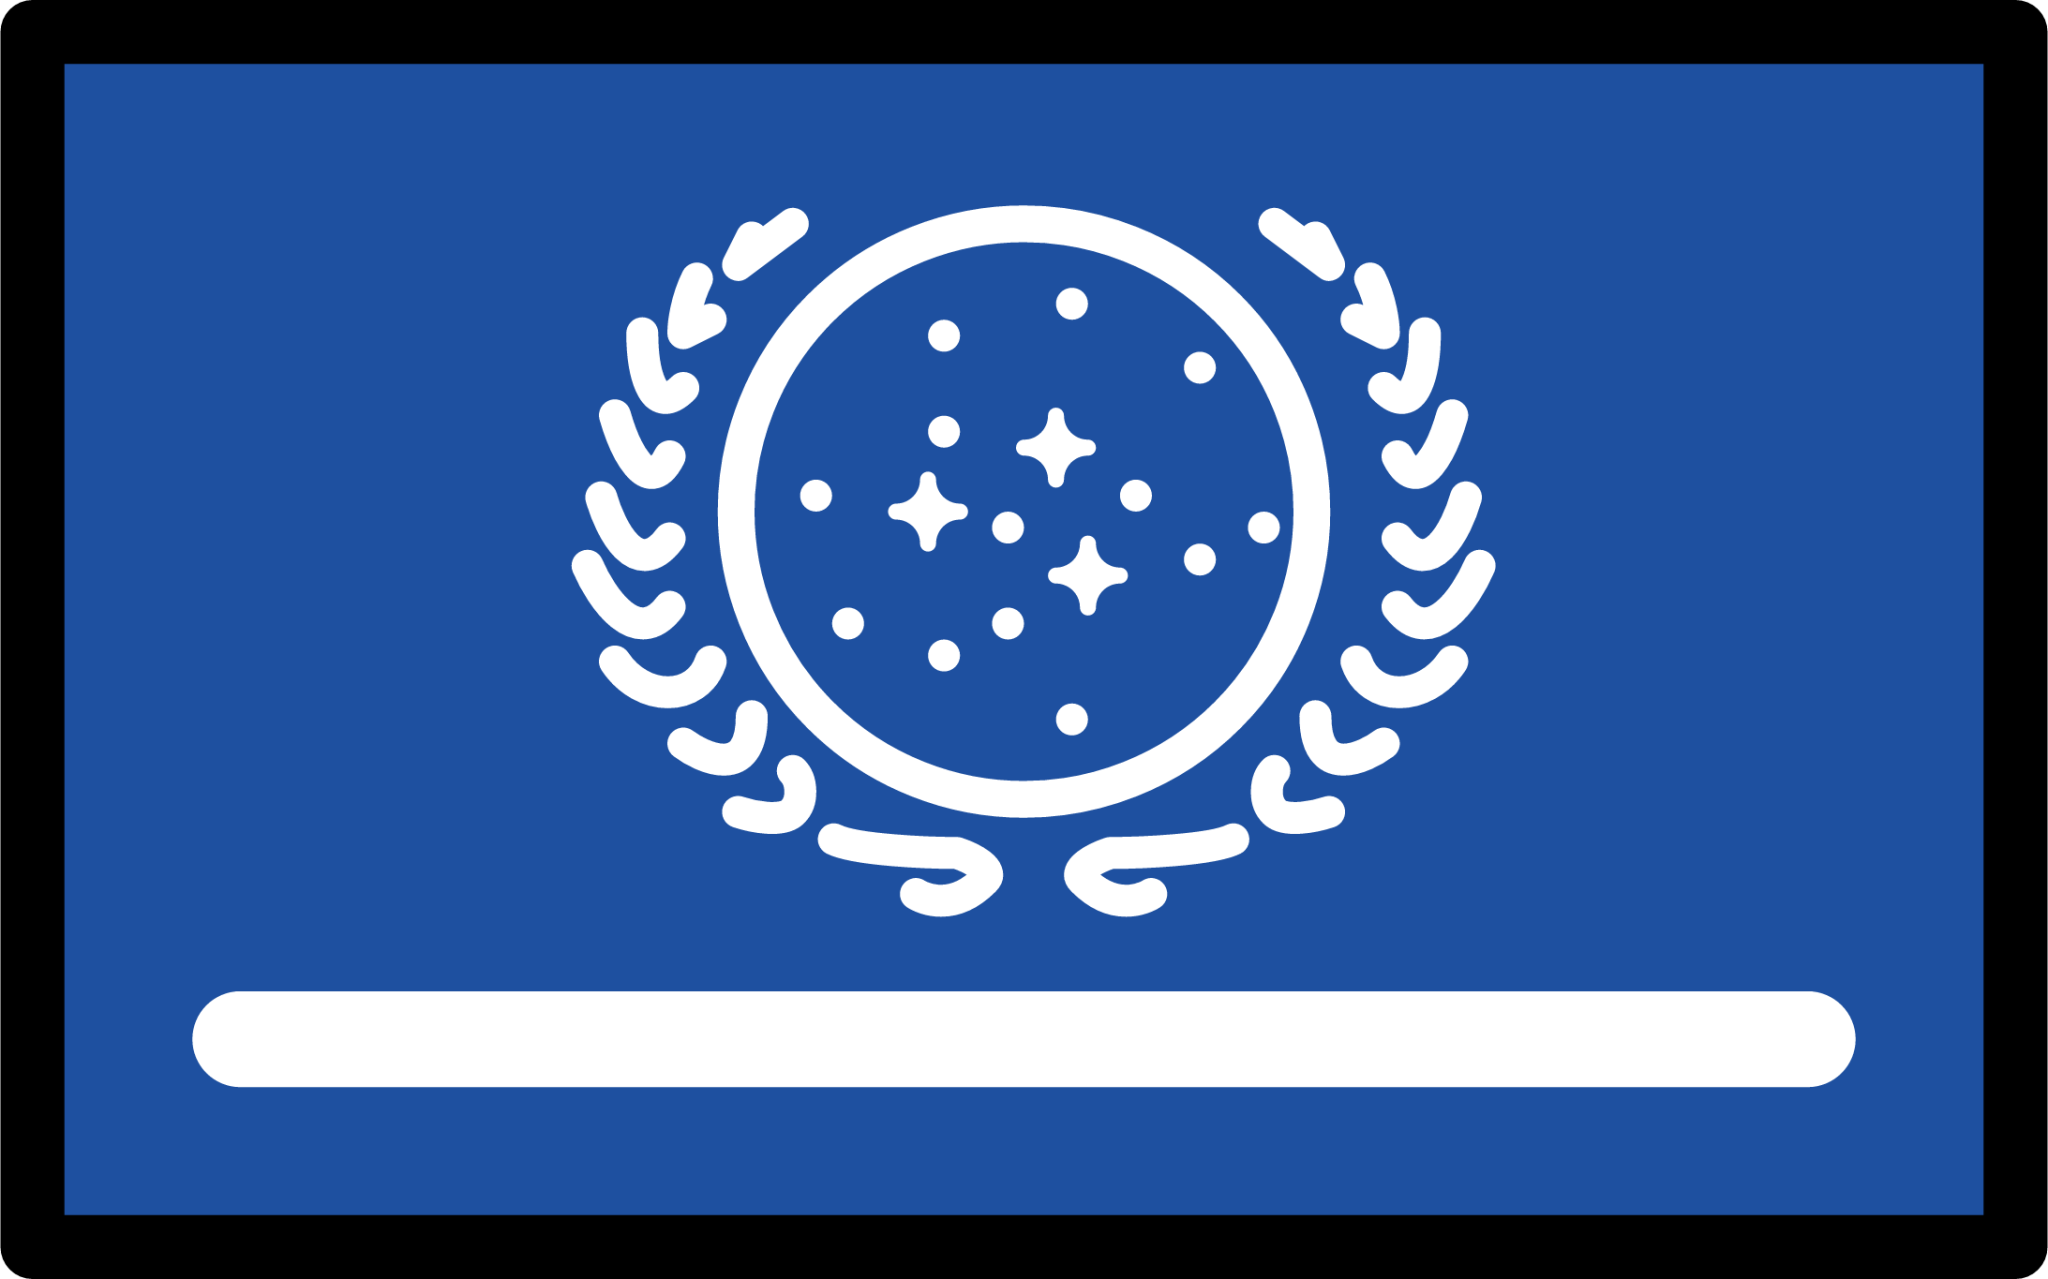 federation of planets insignia